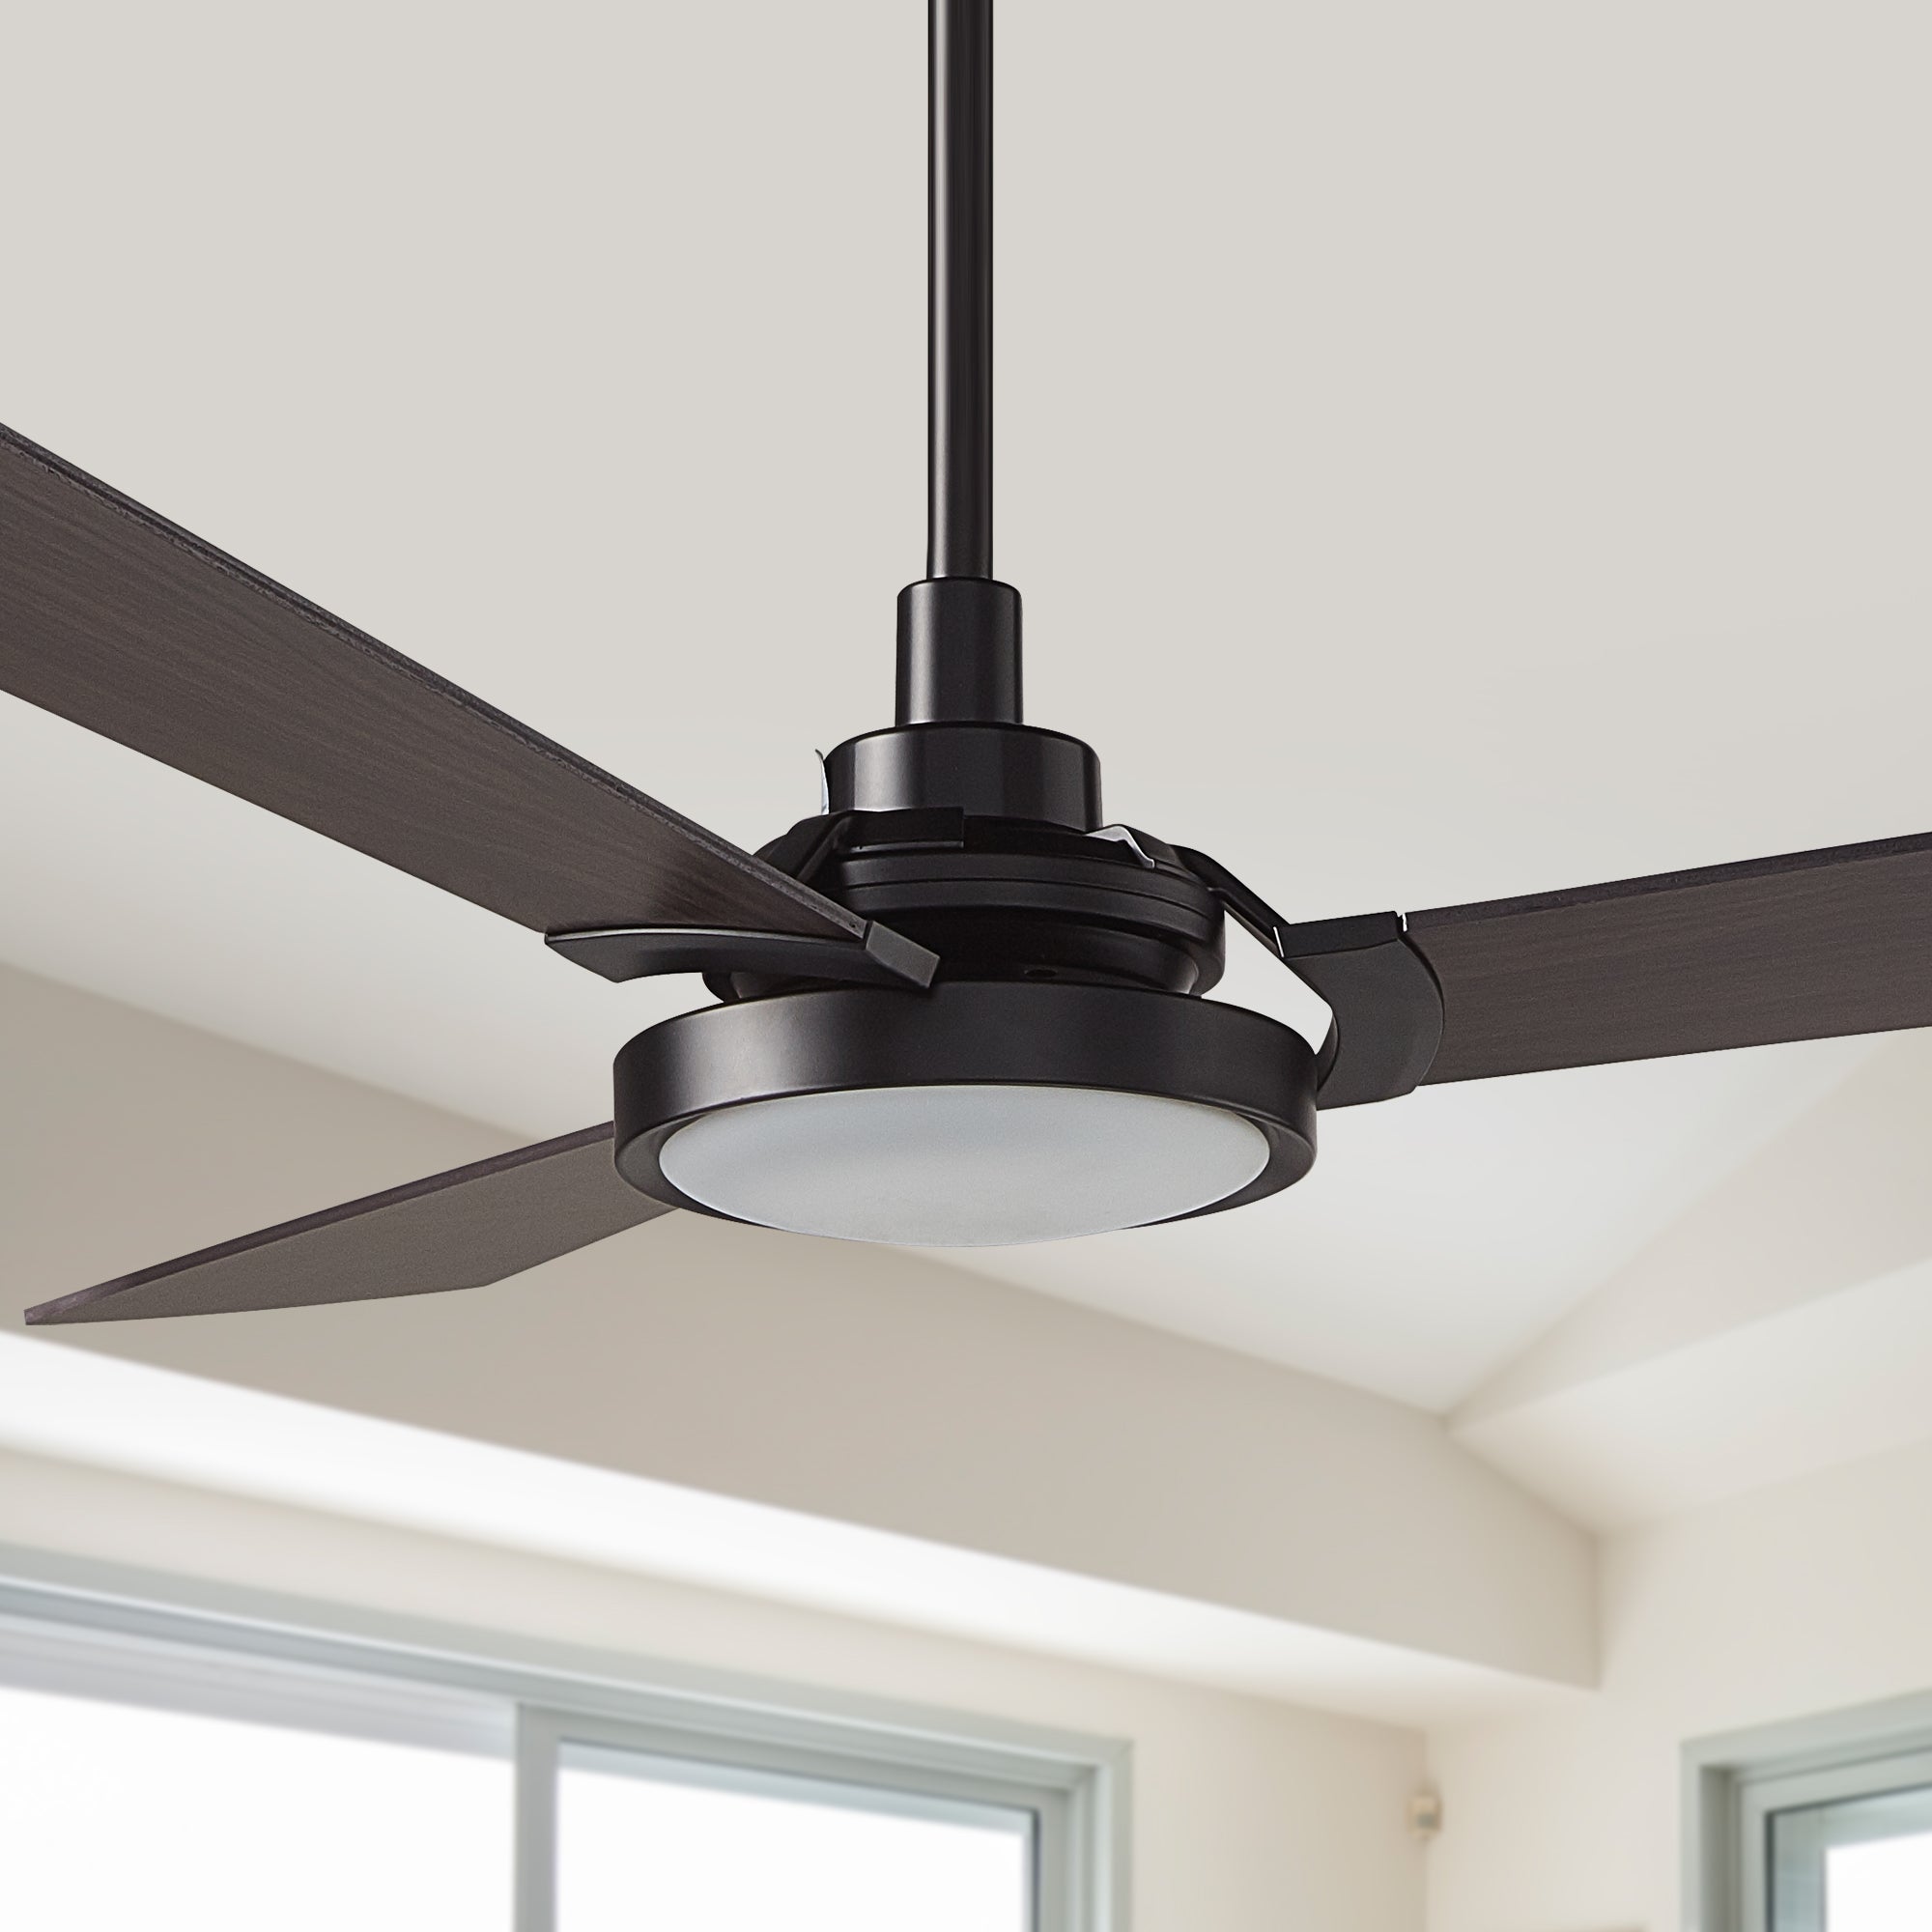 Carro Viter smart ceiling fan with light designed with dark wood finish, elegant Plywood blades, Glass shade and integrated 4000K LED daylight. #color_Dark-Wood